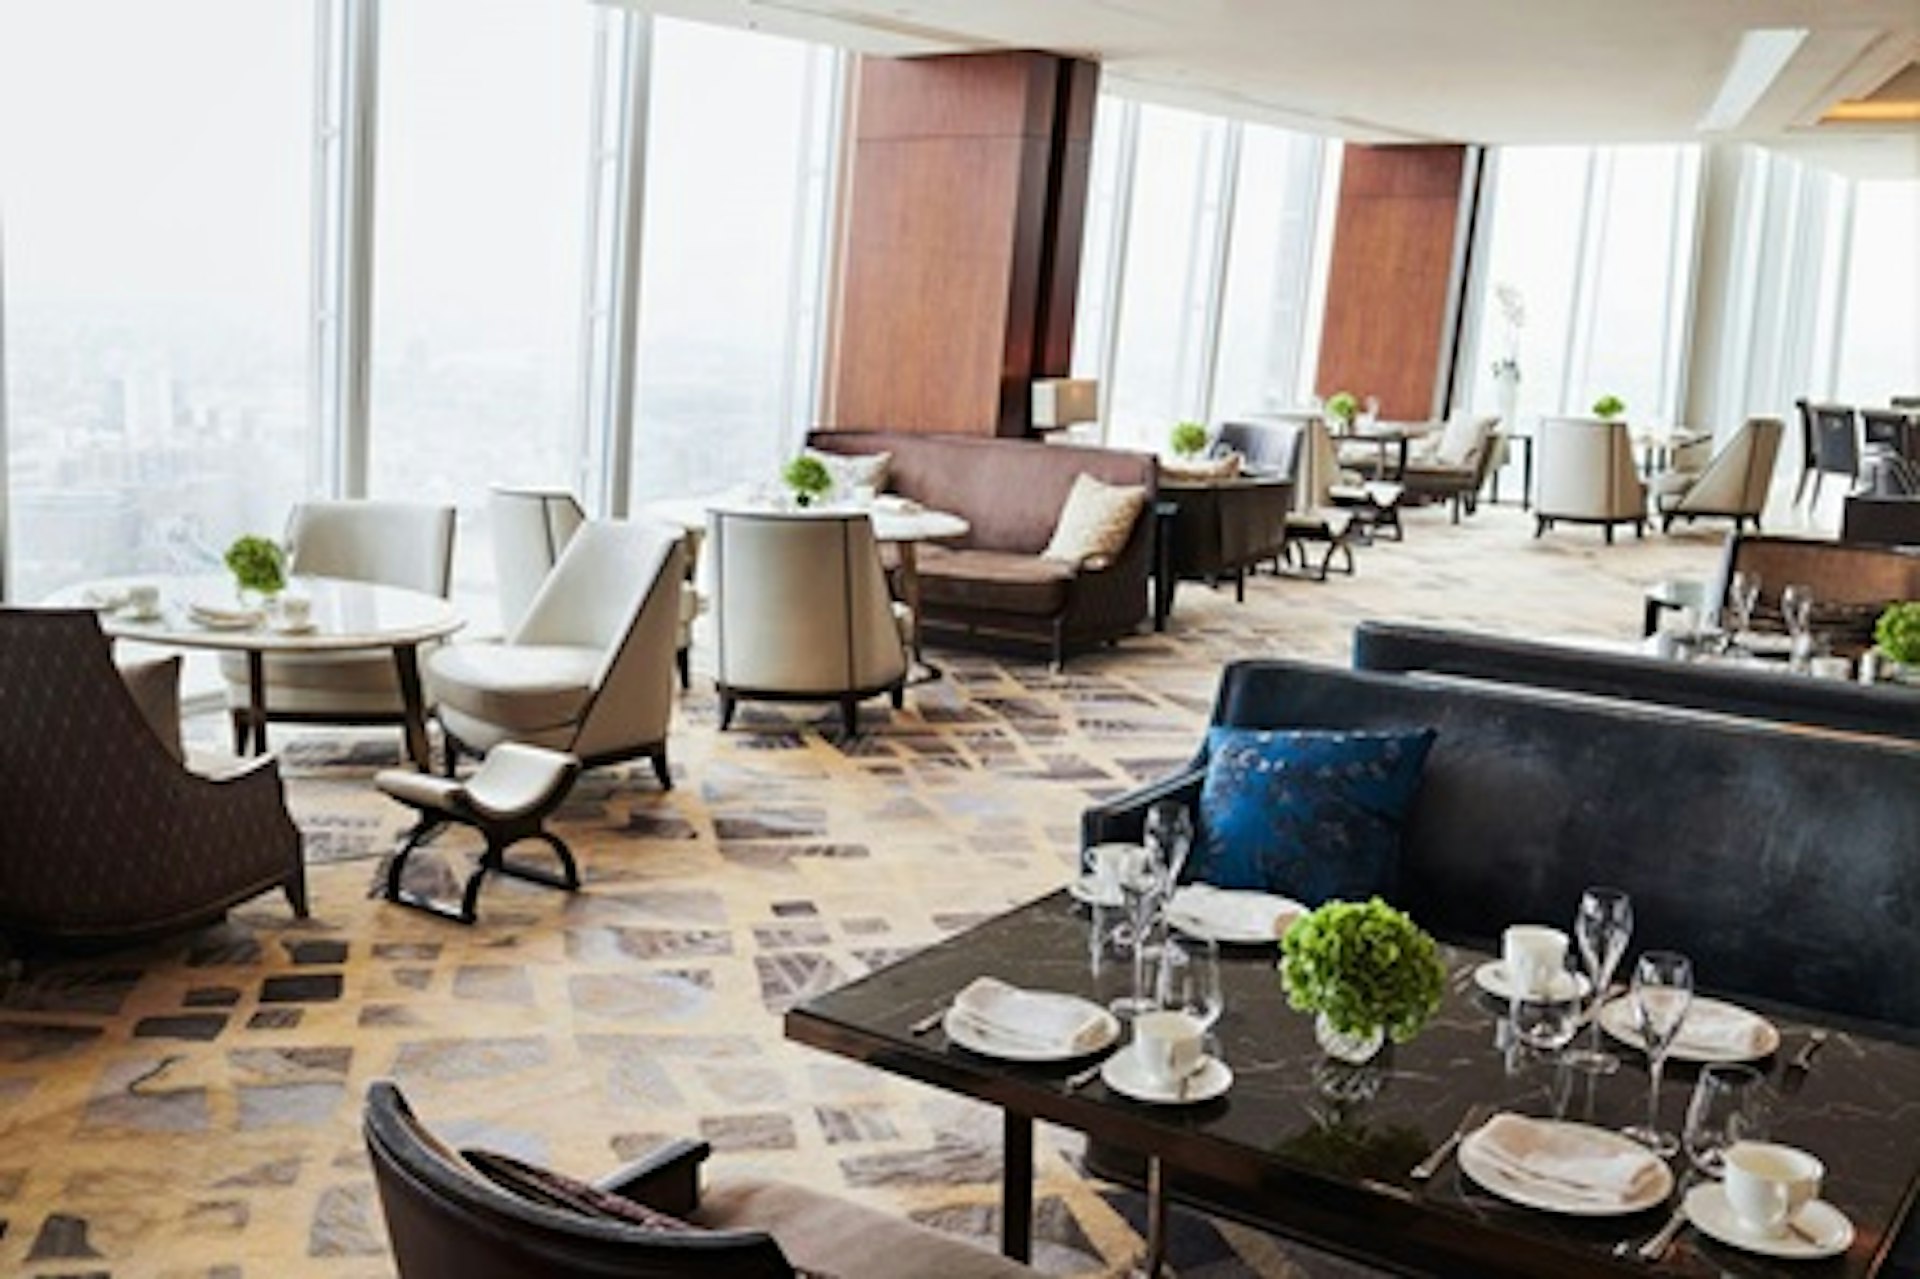 Liquid Afternoon Tea for Two at Gong within the 5* Luxury Shangri-La at The Shard, London 3